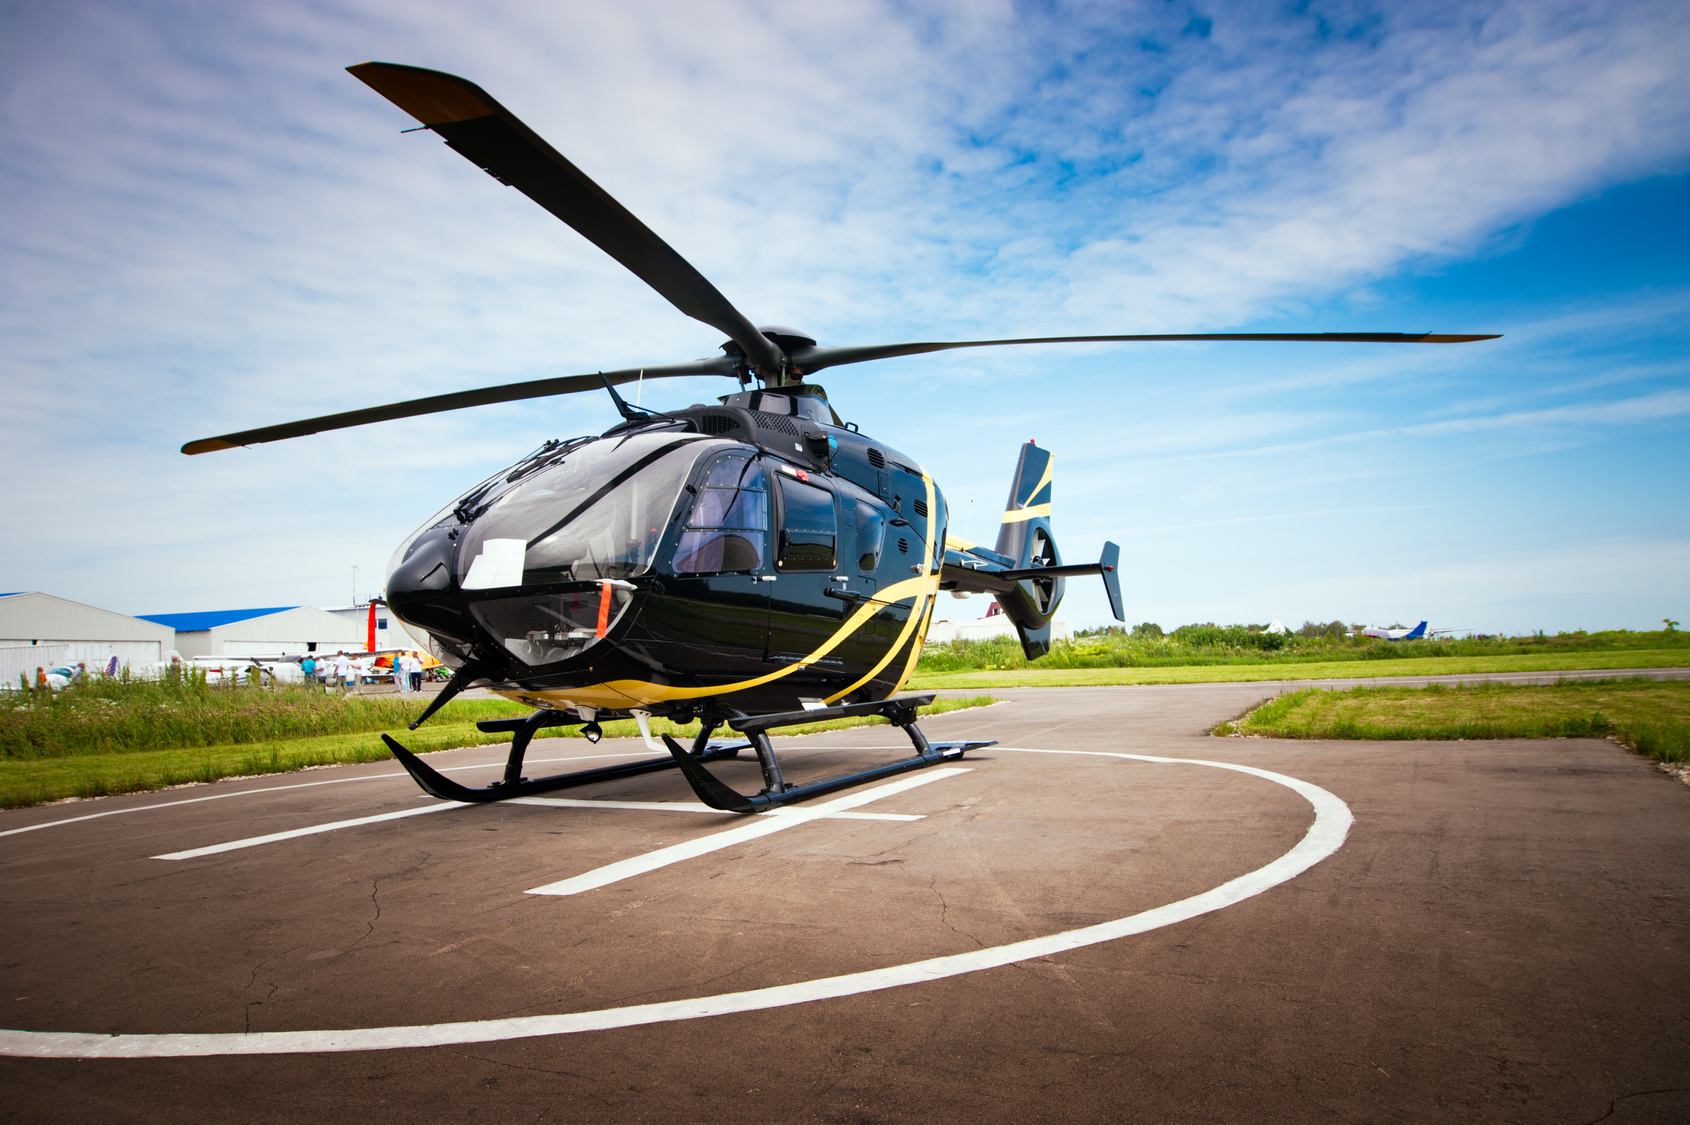 Private Helicopter Wallpaper High Quality